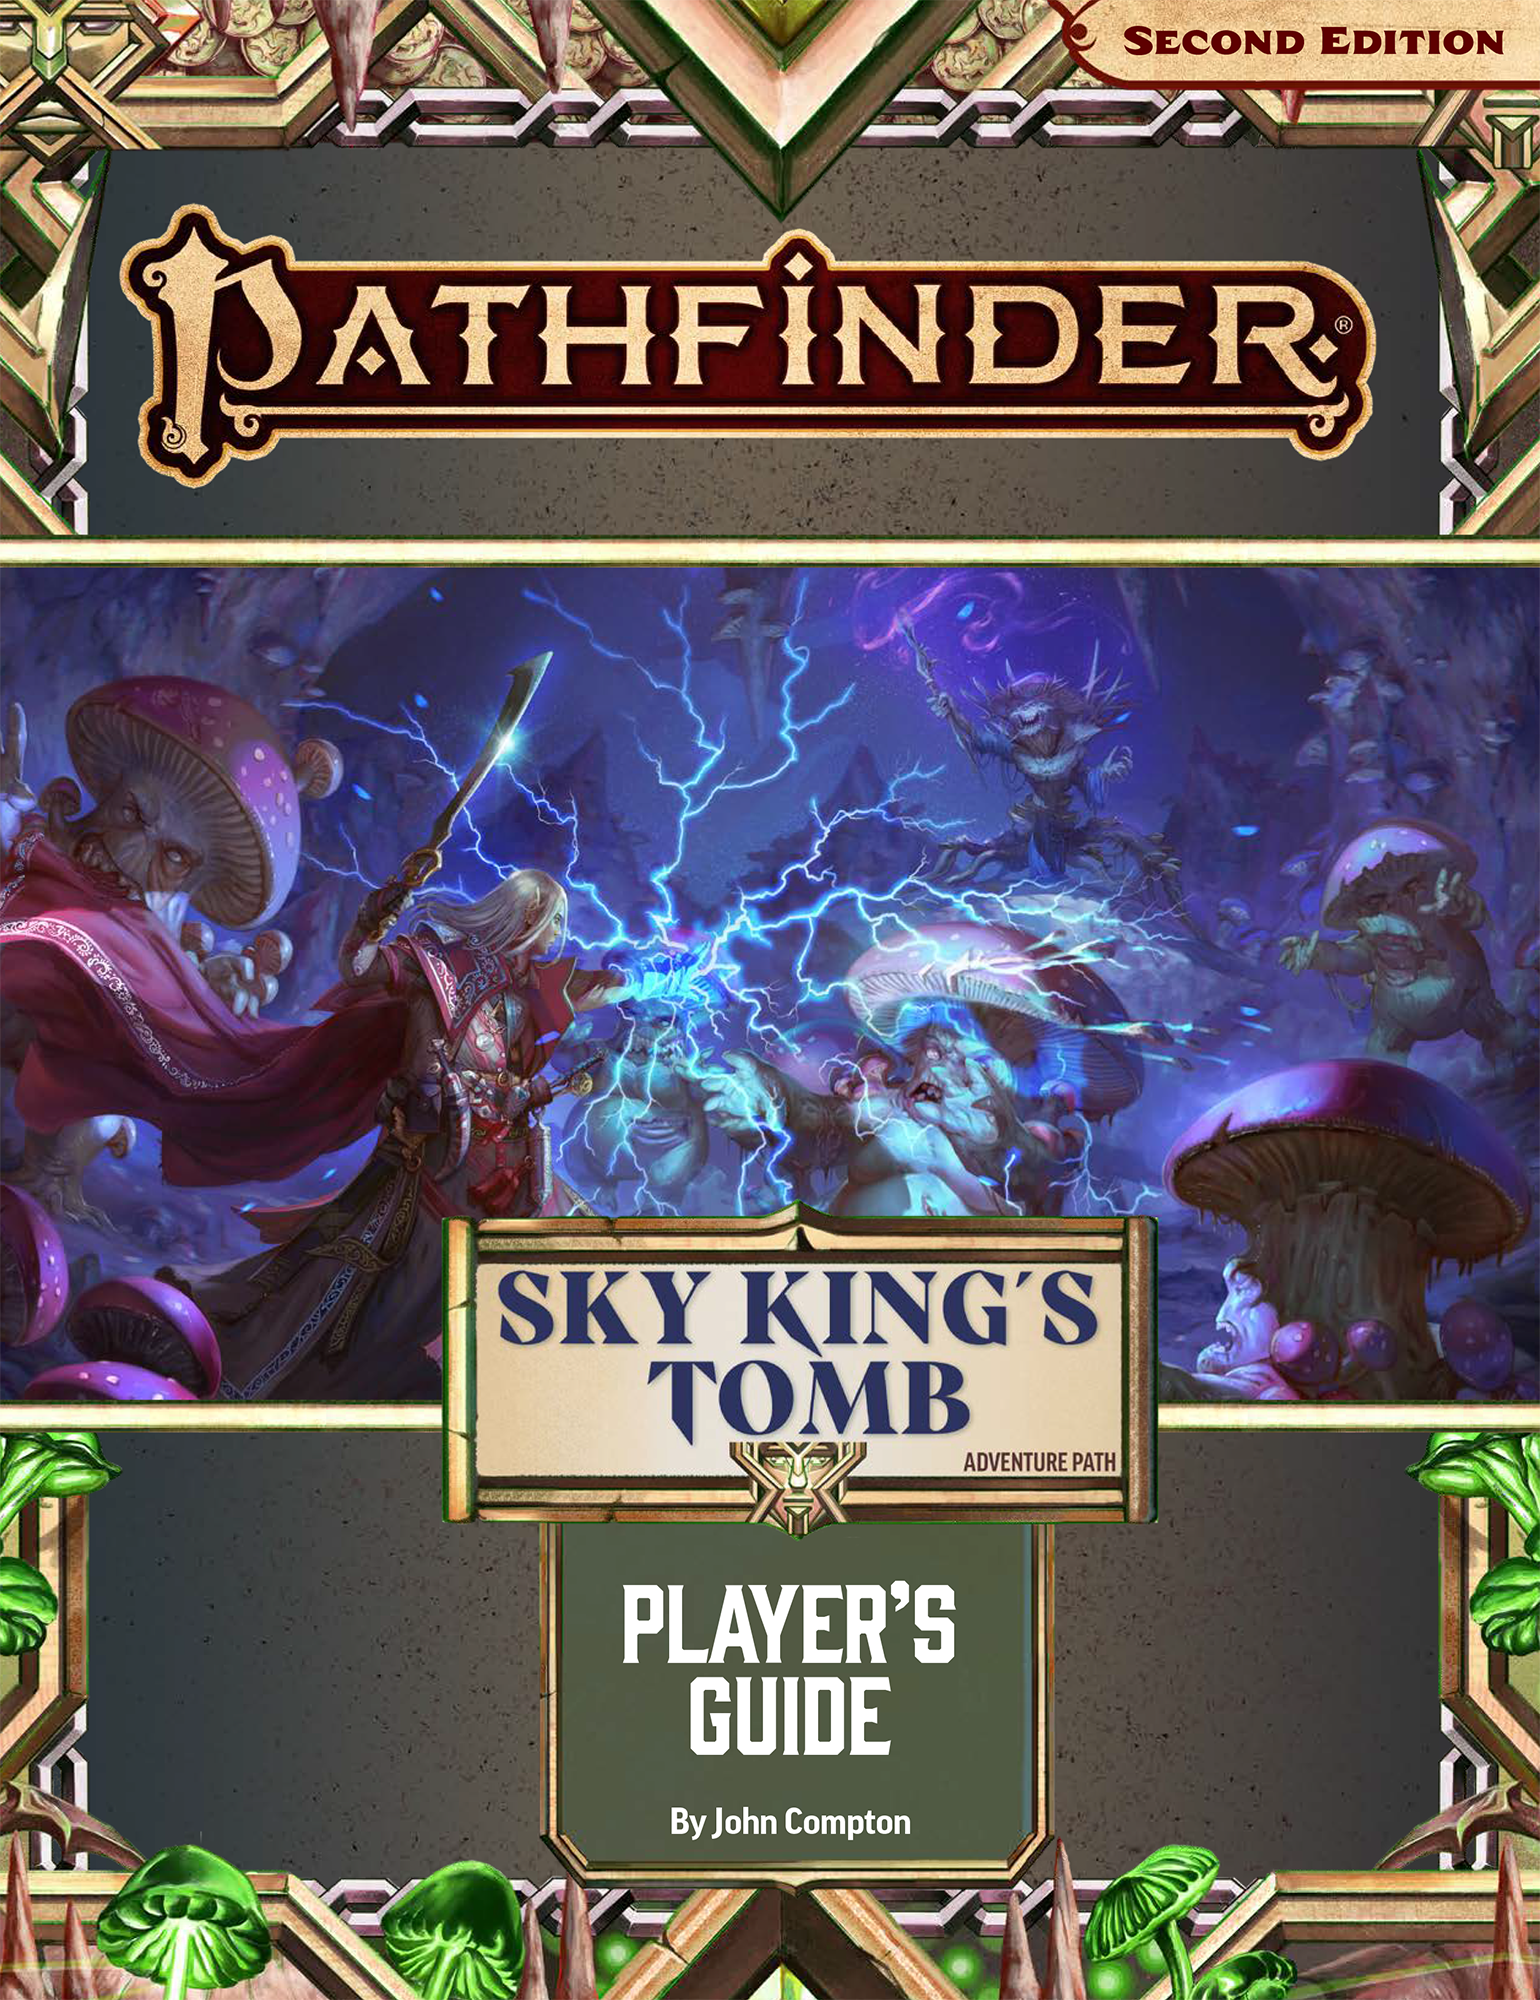 Pathfinder Second Edition Sky King's Tomb Player's Guide Cover